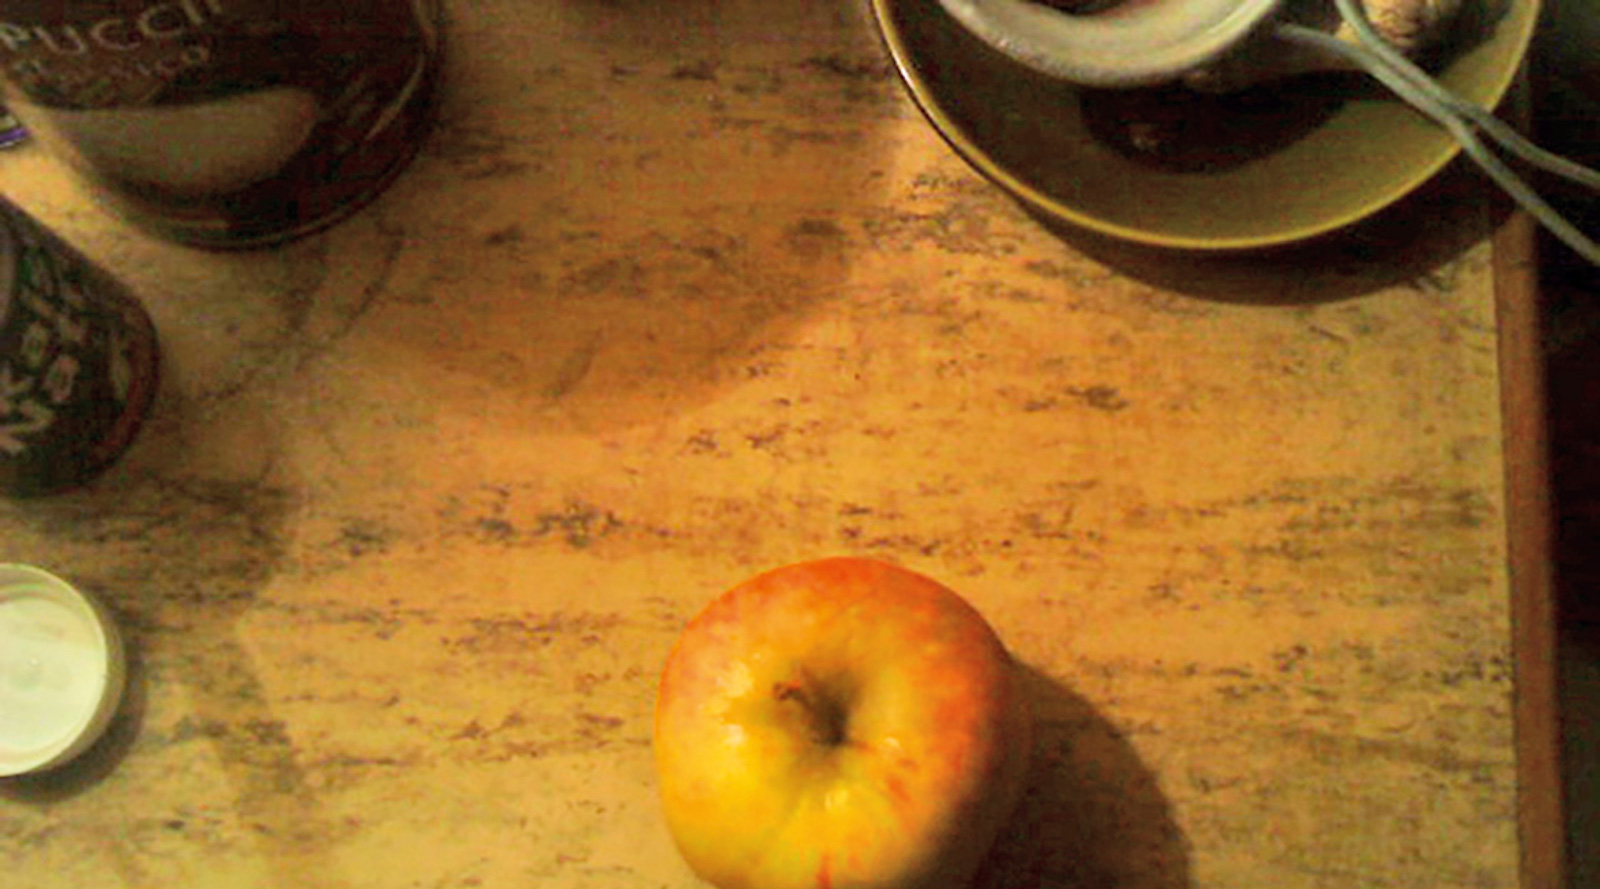 A photographic still life of an apple on a table, with mug and saucer nearby.